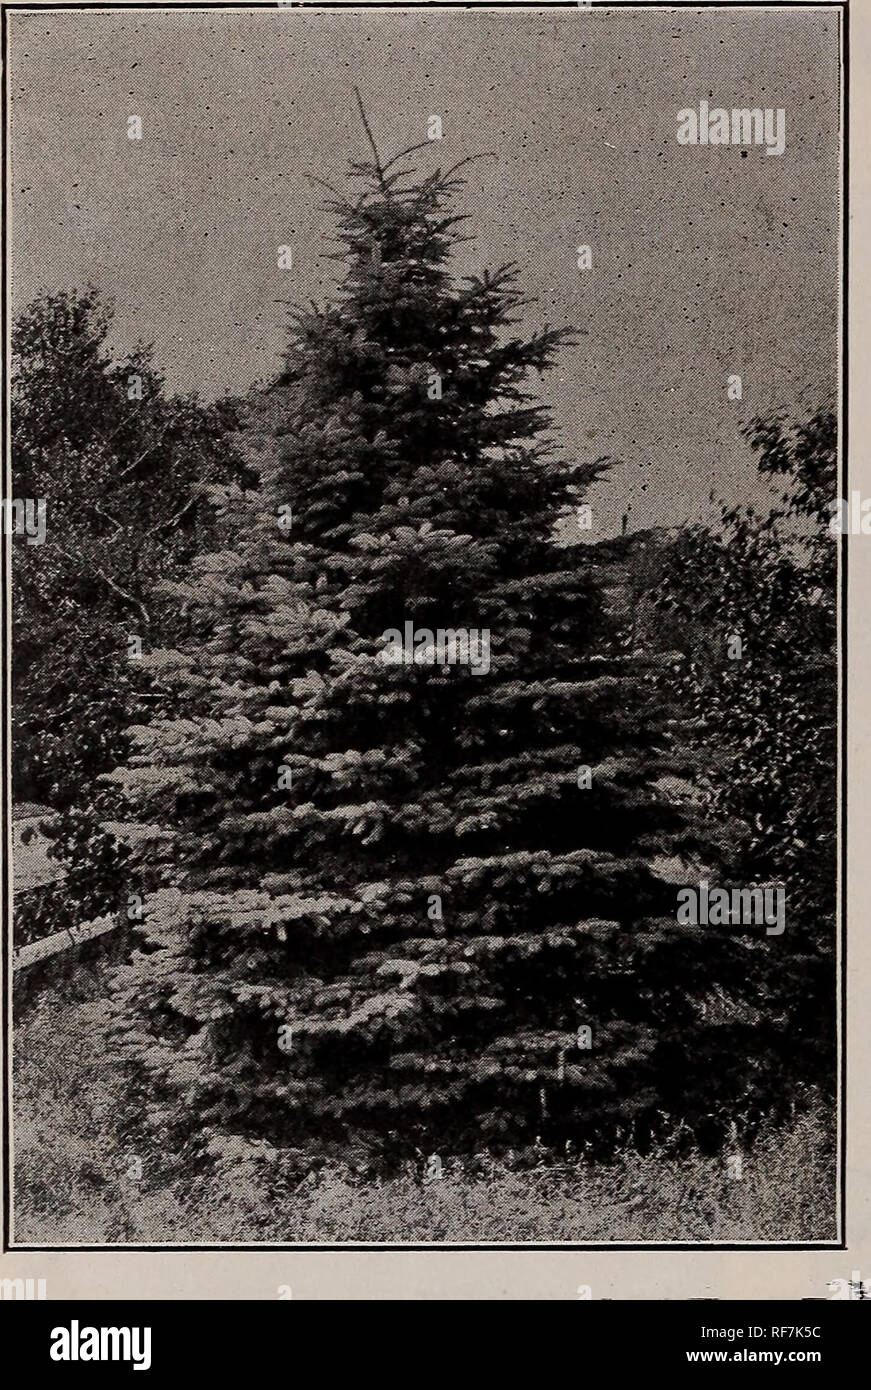 . Catalogue of Dutch, French, Japanese and other bulbs :. Nursery stock New Jersey Rutherford Catalogs; Bulbs (Plants) Catalogs; Flowers Seeds Catalogs; Plants, Ornamental Catalogs. BOBBINK &amp; ATKINS, RUTHERFORD, N. J. 22 Evergreen Trees. Picea Pungens Glauca {Blue Spruce). A. lasiocarpa. Bluish-green foliage, long needles, spreading habit, very distinct. Ea. $3.00 to $5.00. A. 1. argentea. A silvery variety of the above. Ea. $3.00 to $5.00. A. magnifica. Slow but beautiful growler; blu- ish foliage; extra fine evergreen. Ea. $2.50 to $5.00. A. m. glauca. Ea. $2.50 to $5.00. A. nobilis glau Stock Photo